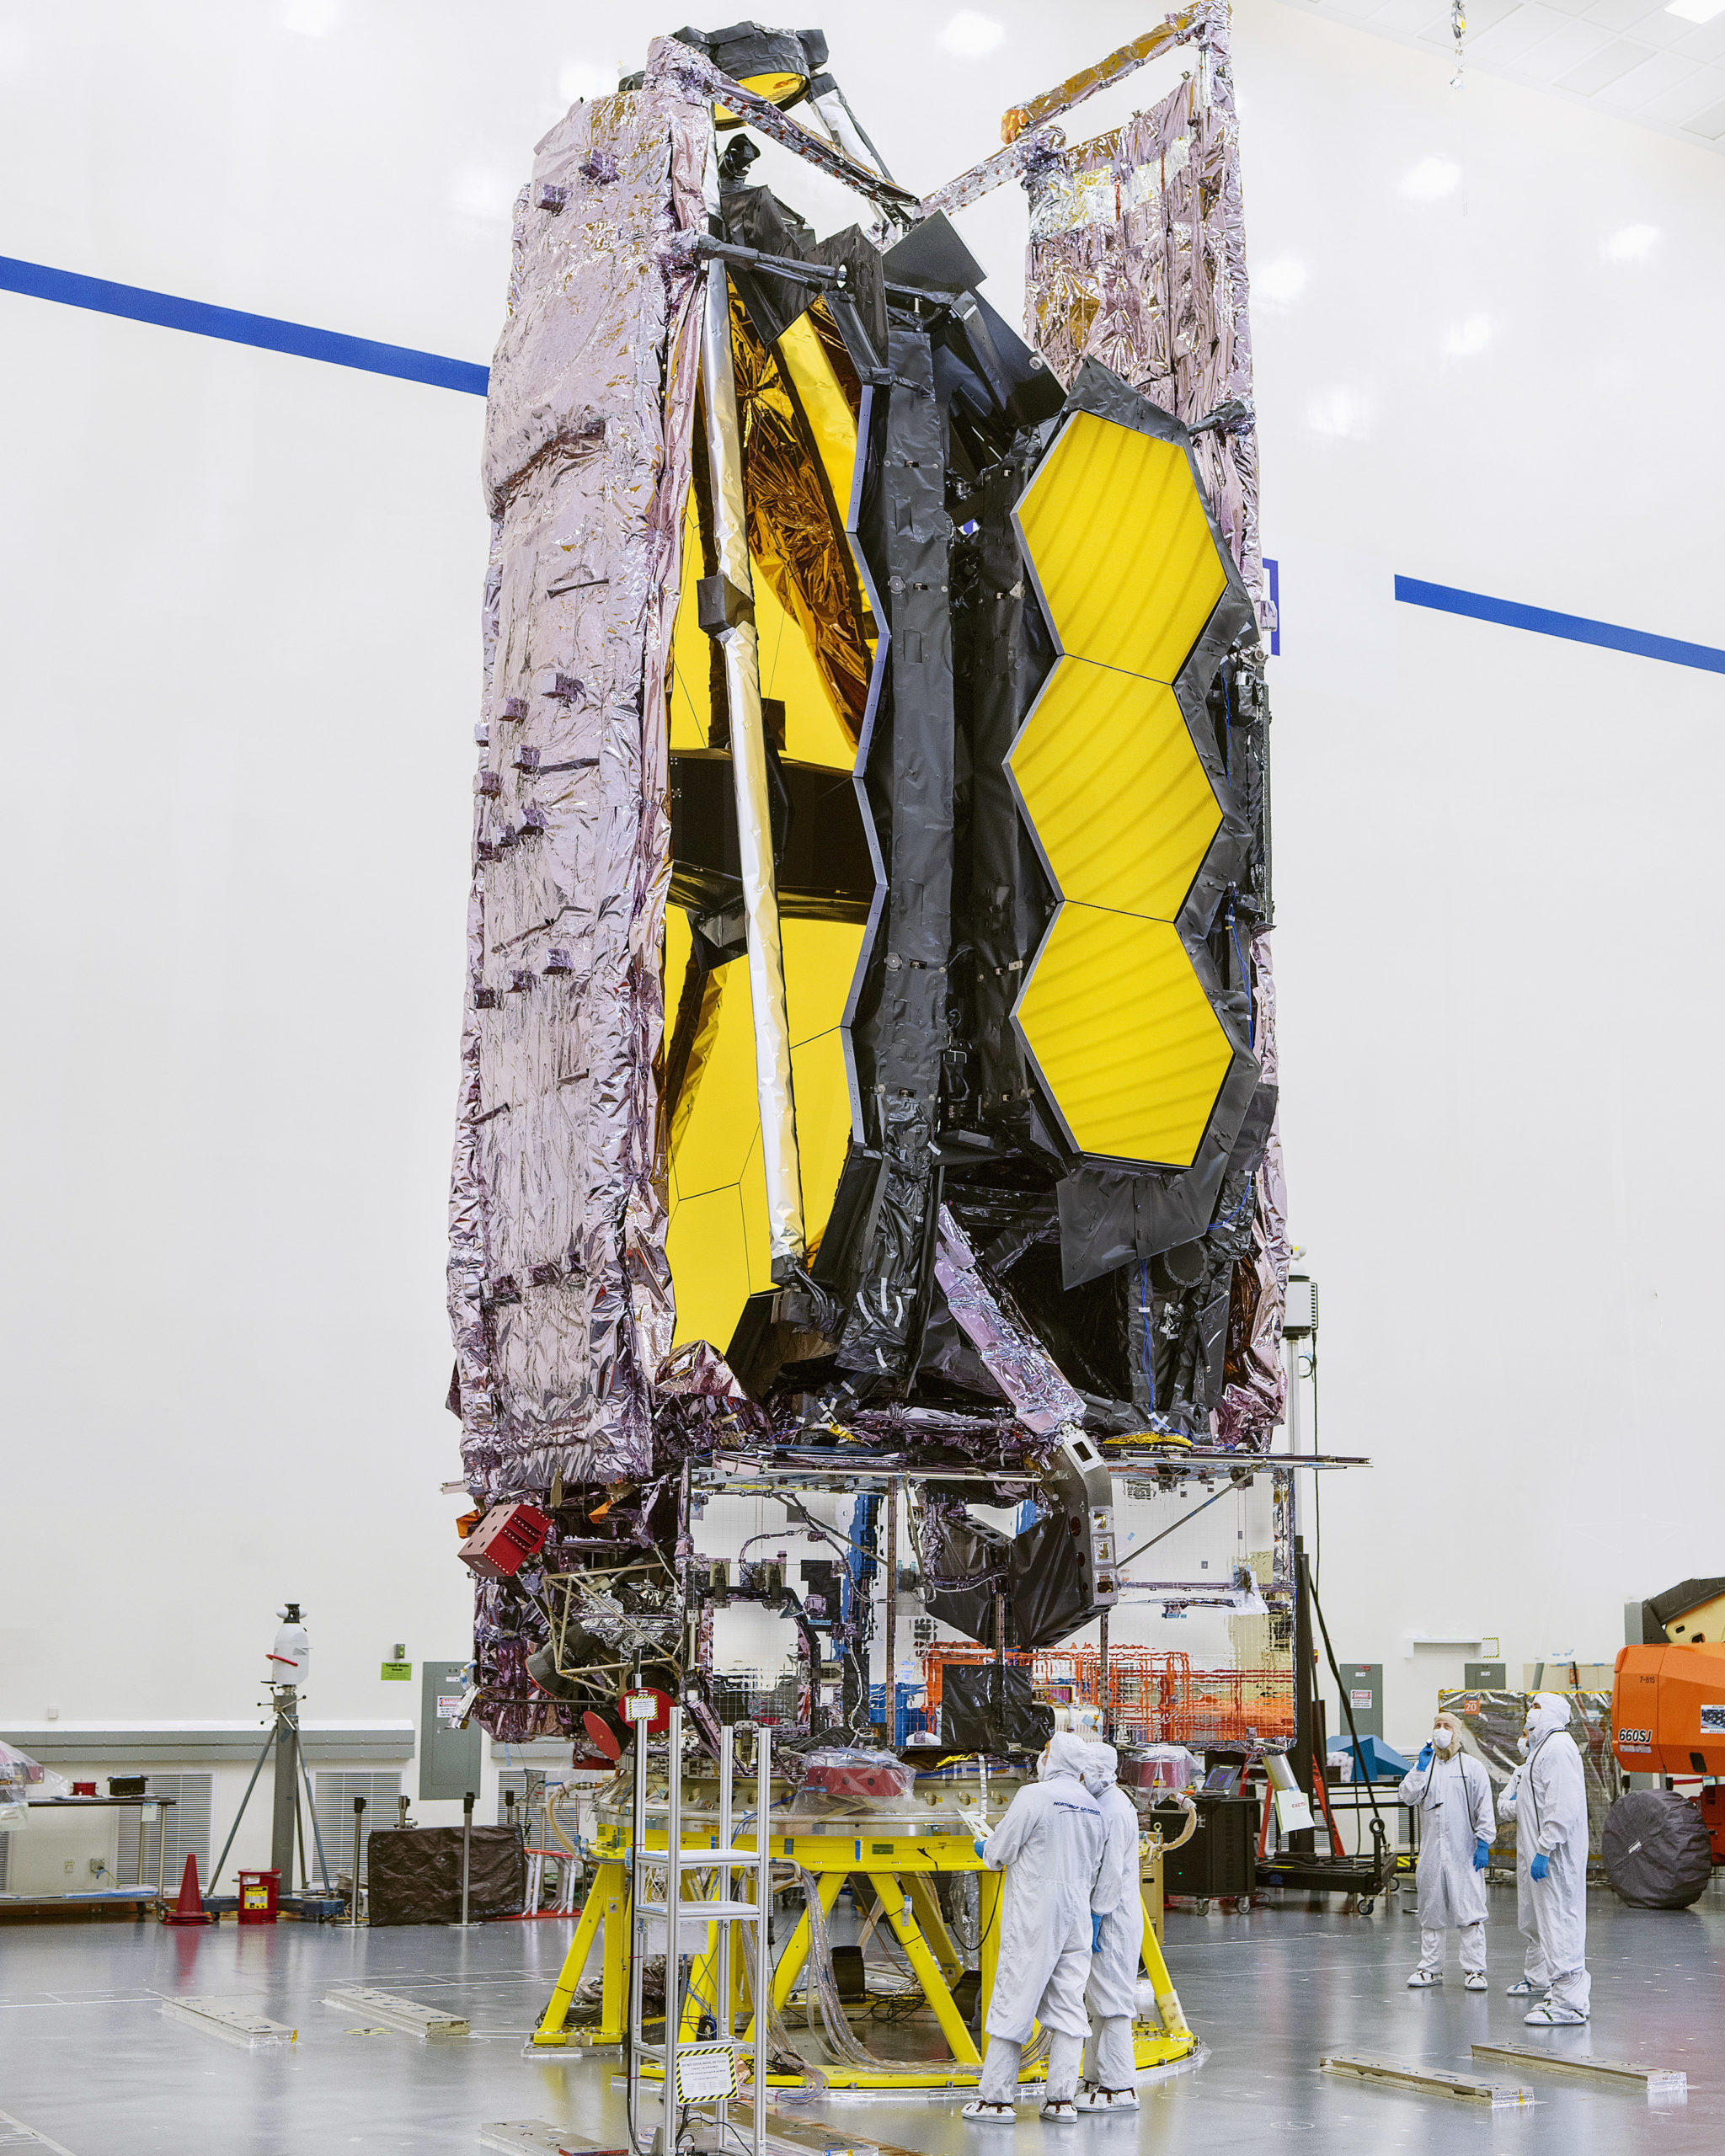 James Webb Space Telescope folded up to fit inside rocket fairing for launch